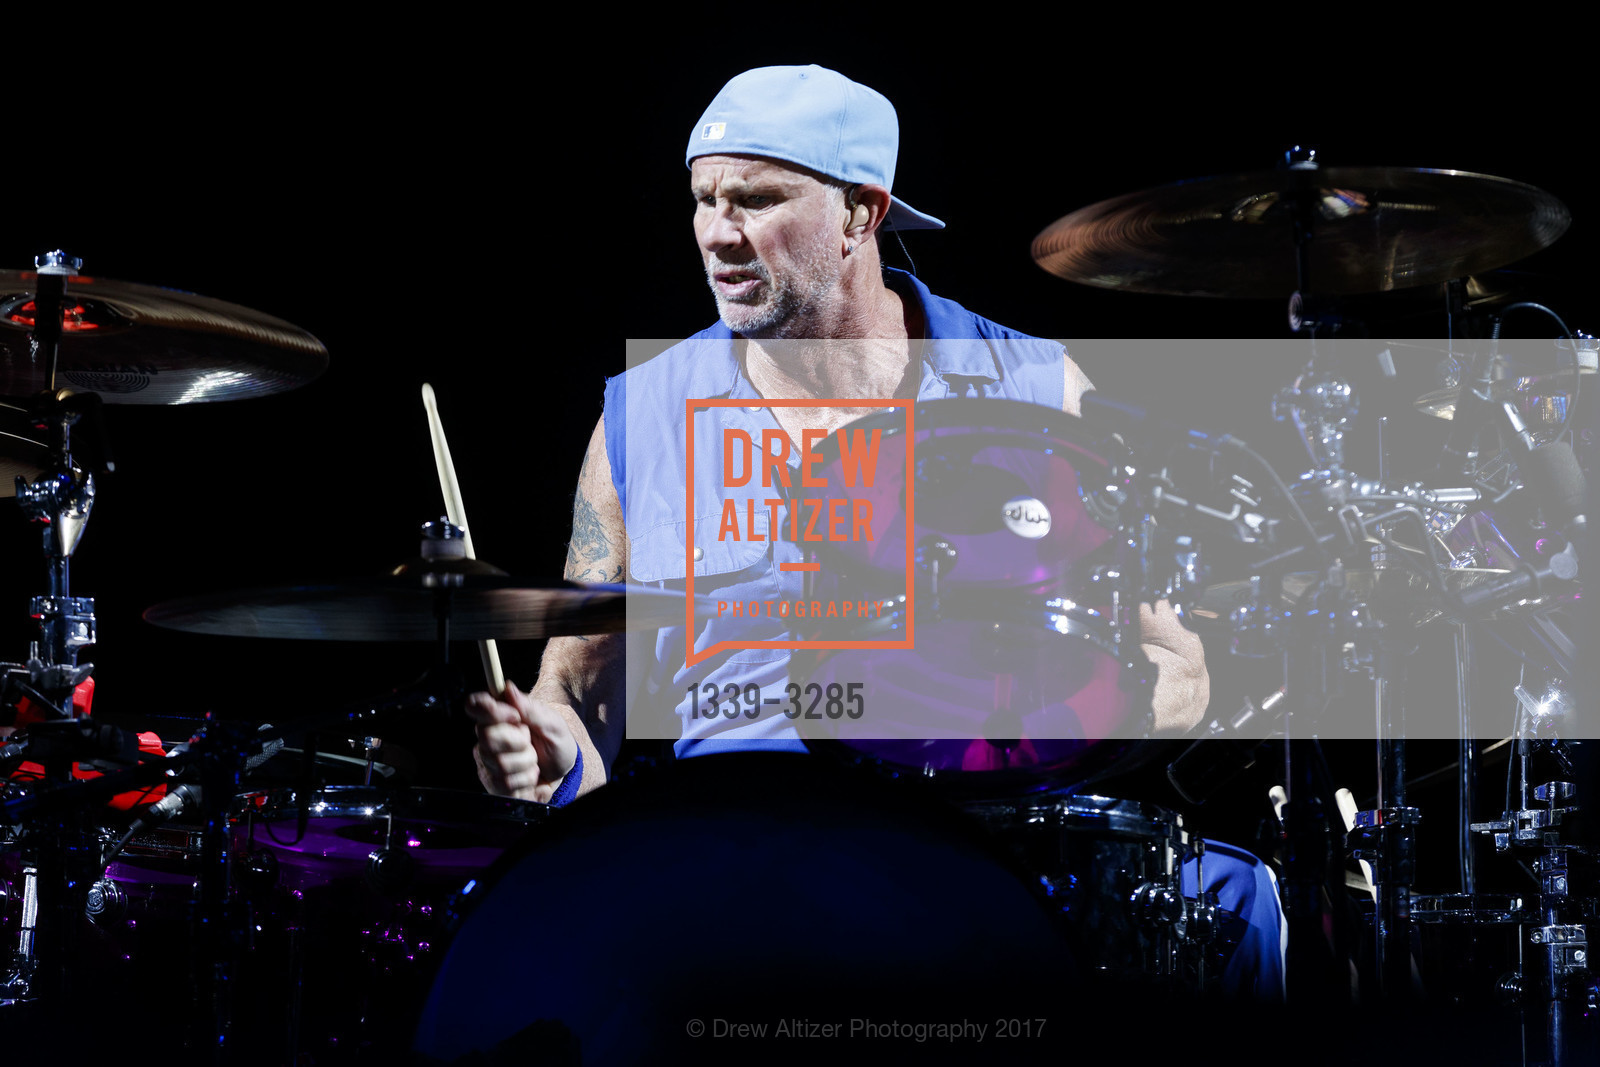 The Red Hot Chili Peppers, Photo #1339-3285